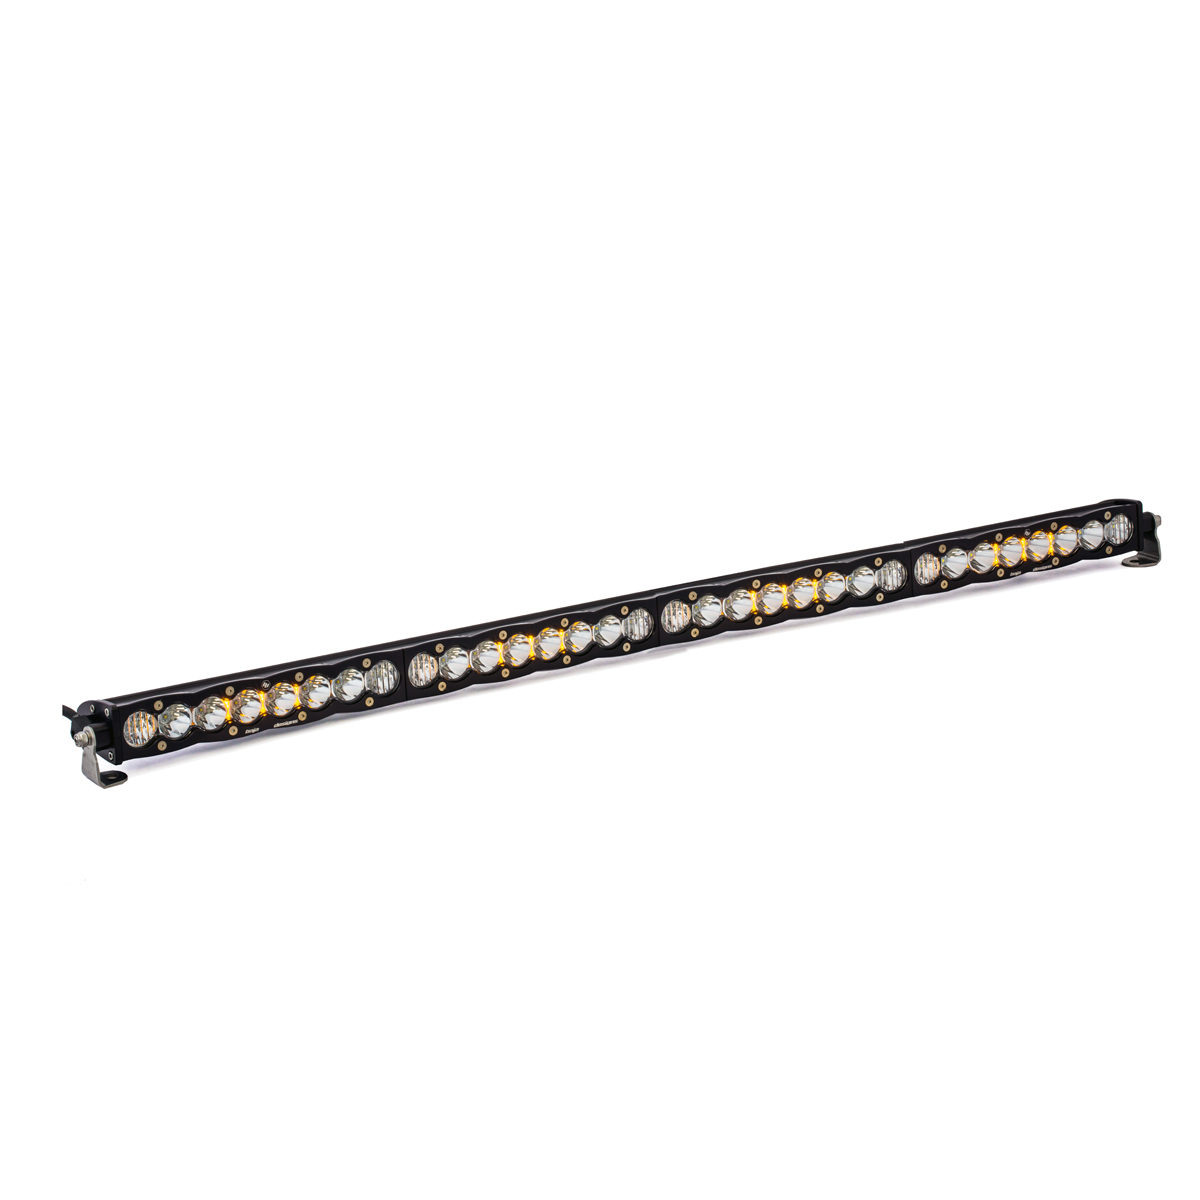 Baja Designs 40 Inch LED Light Bar Driving Combo Pattern S8 Series - Click Image to Close